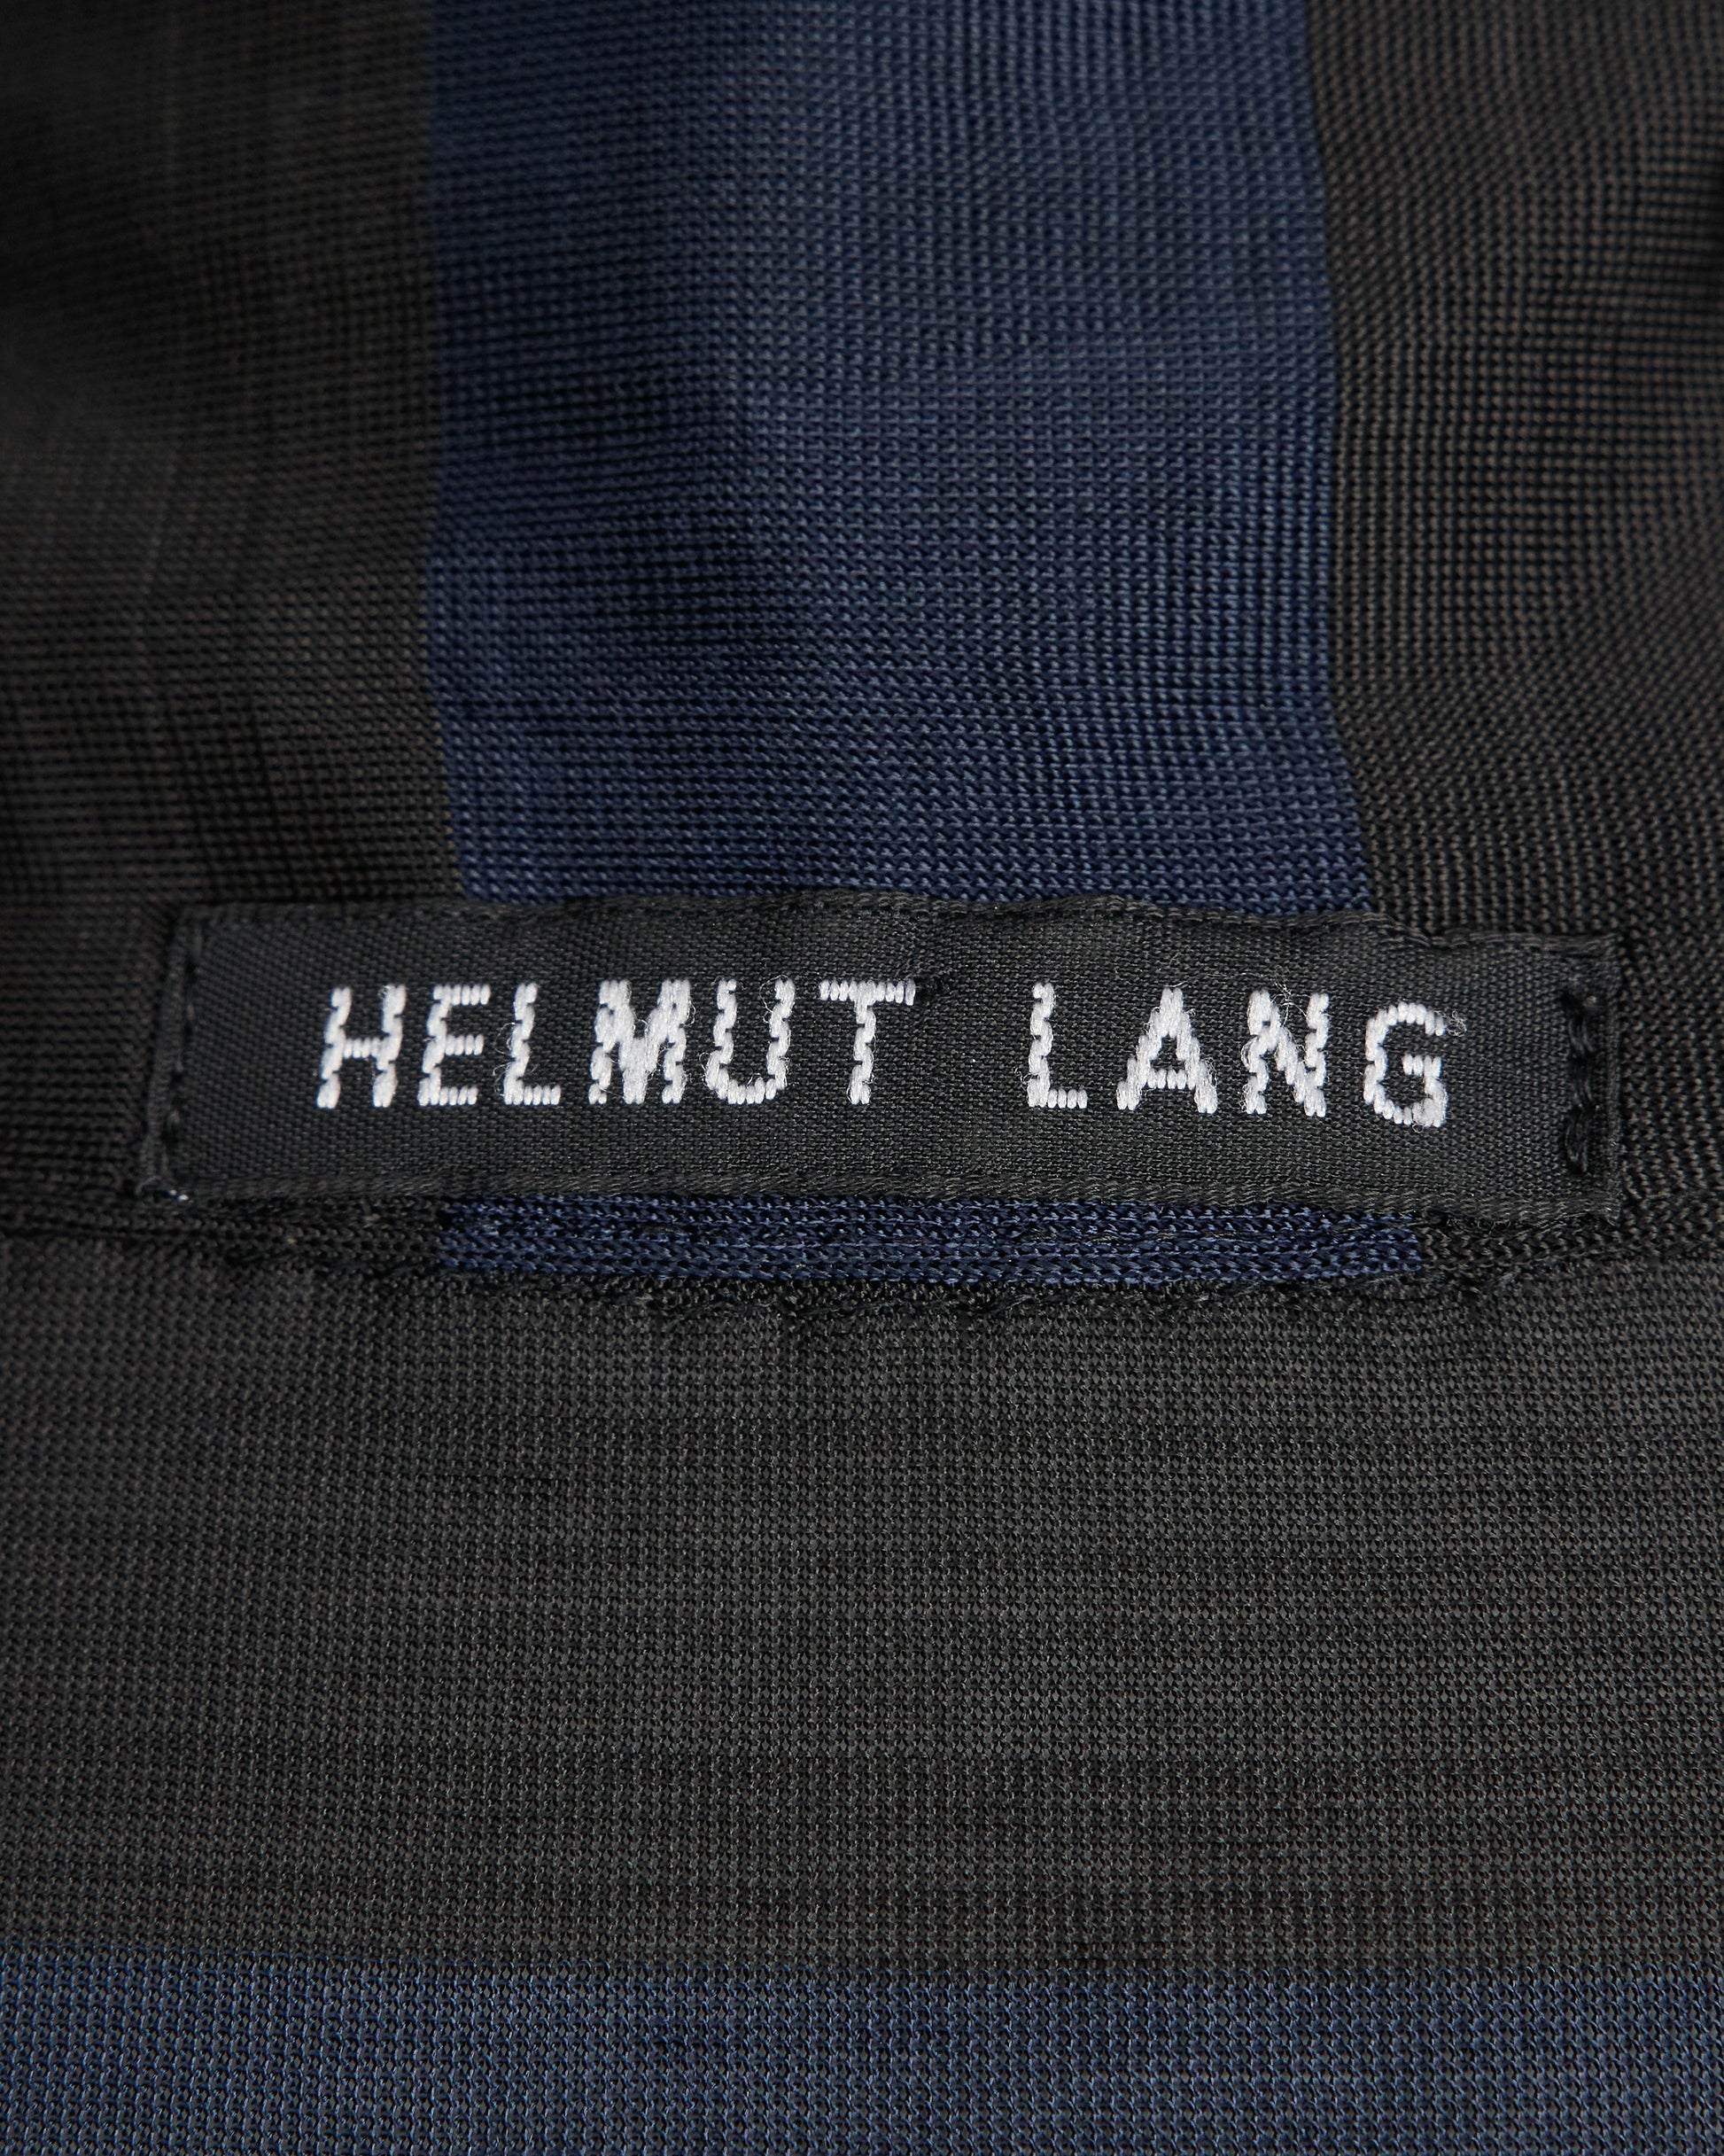 HELMUT LANG product design on Architonic